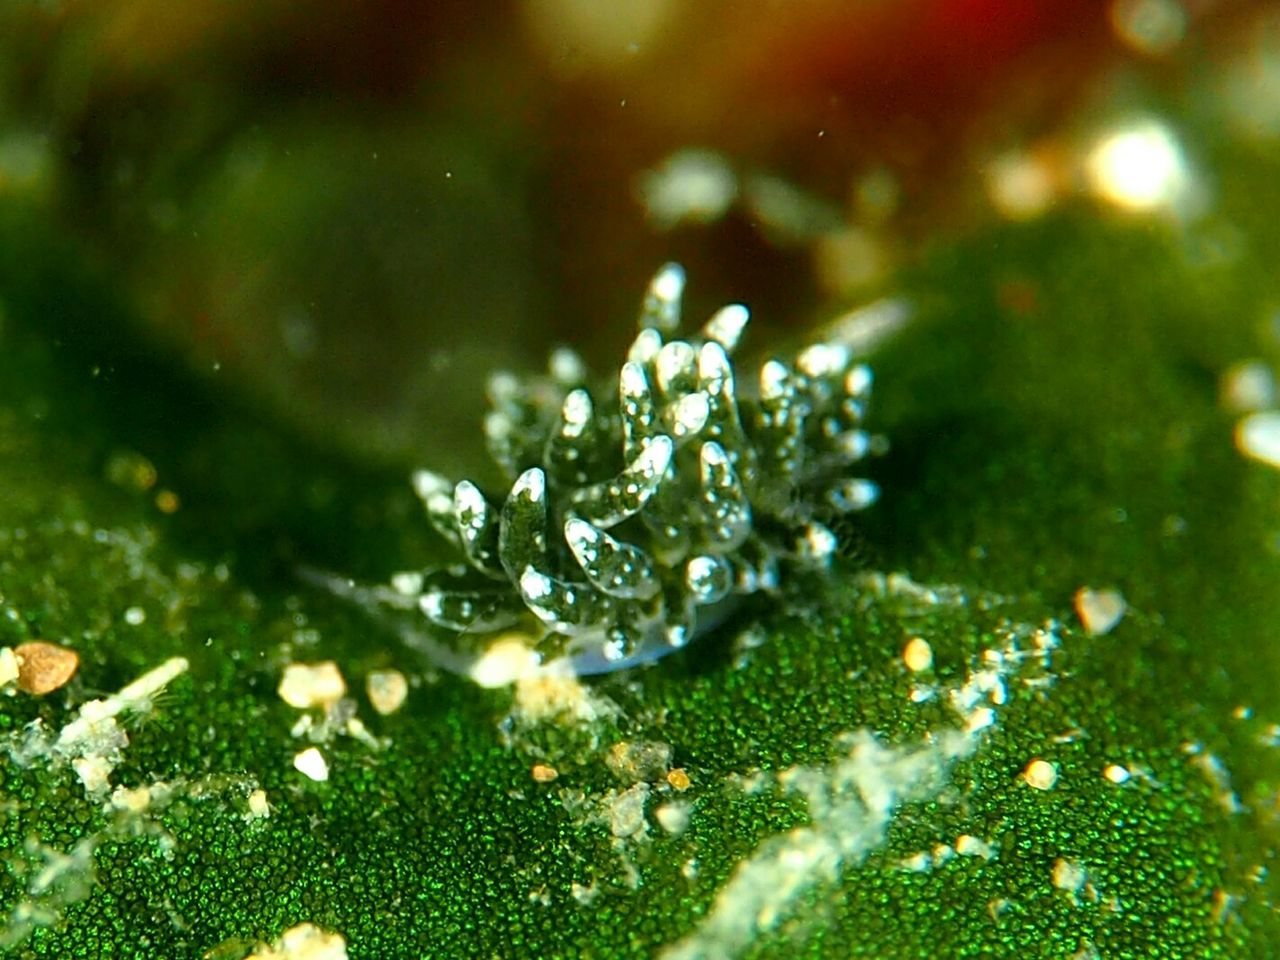 CLOSE-UP OF WATER ON LEAF